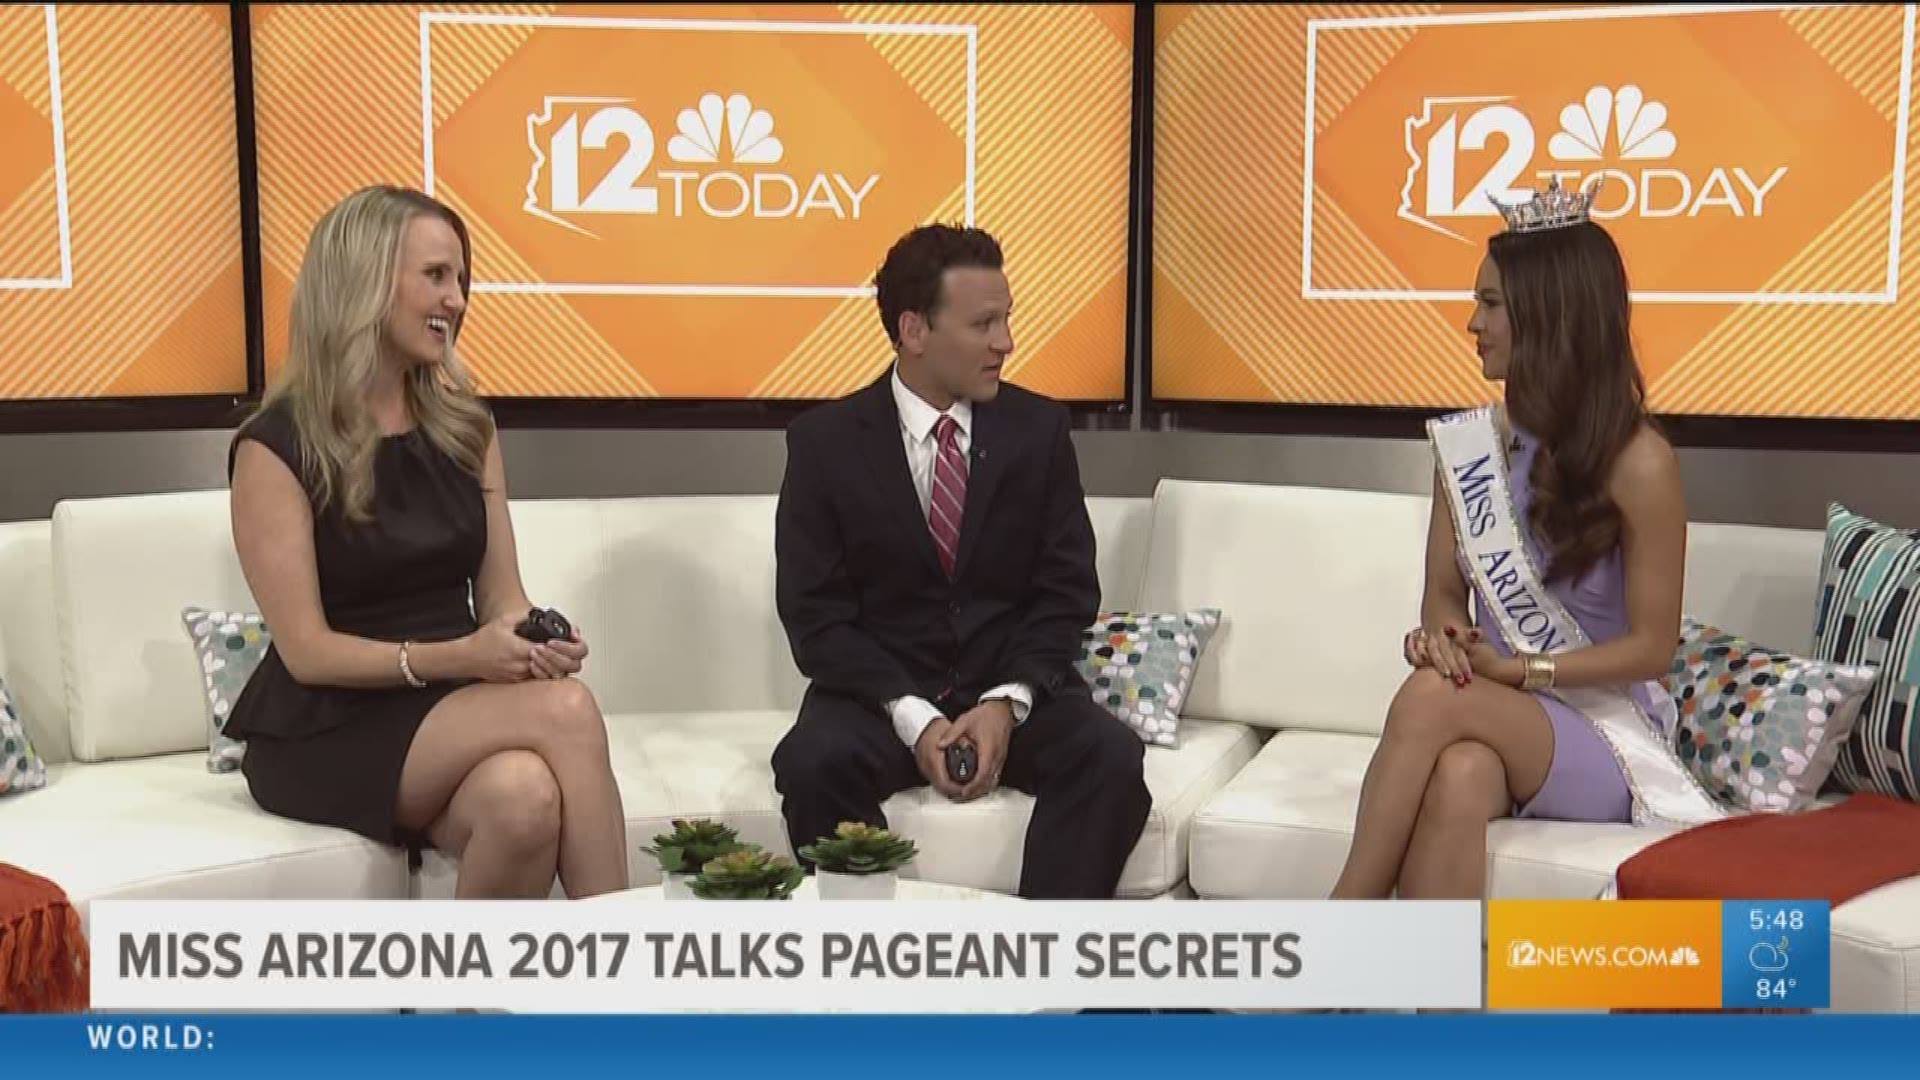 Dozens of young women representing communities all over Arizona will be competing to wear the Miss Arizona crown. She will go on to compete for Miss America.